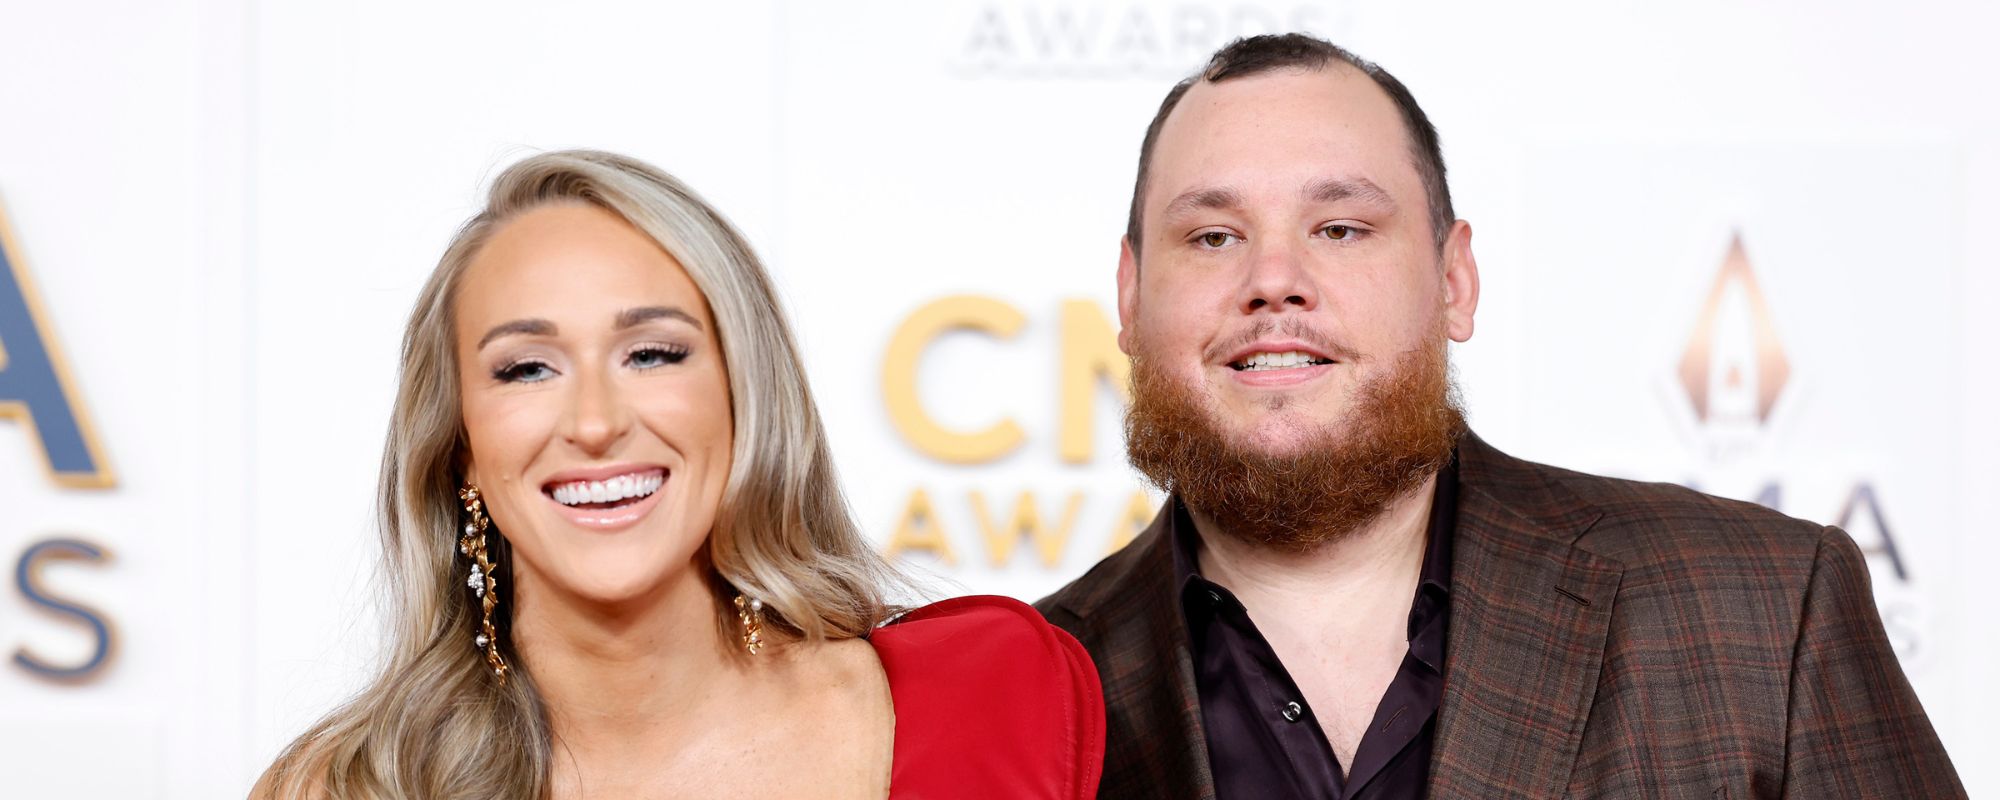 See the Adorably Bizarre Birthday Gift Luke Combs’ Wife Gave Him